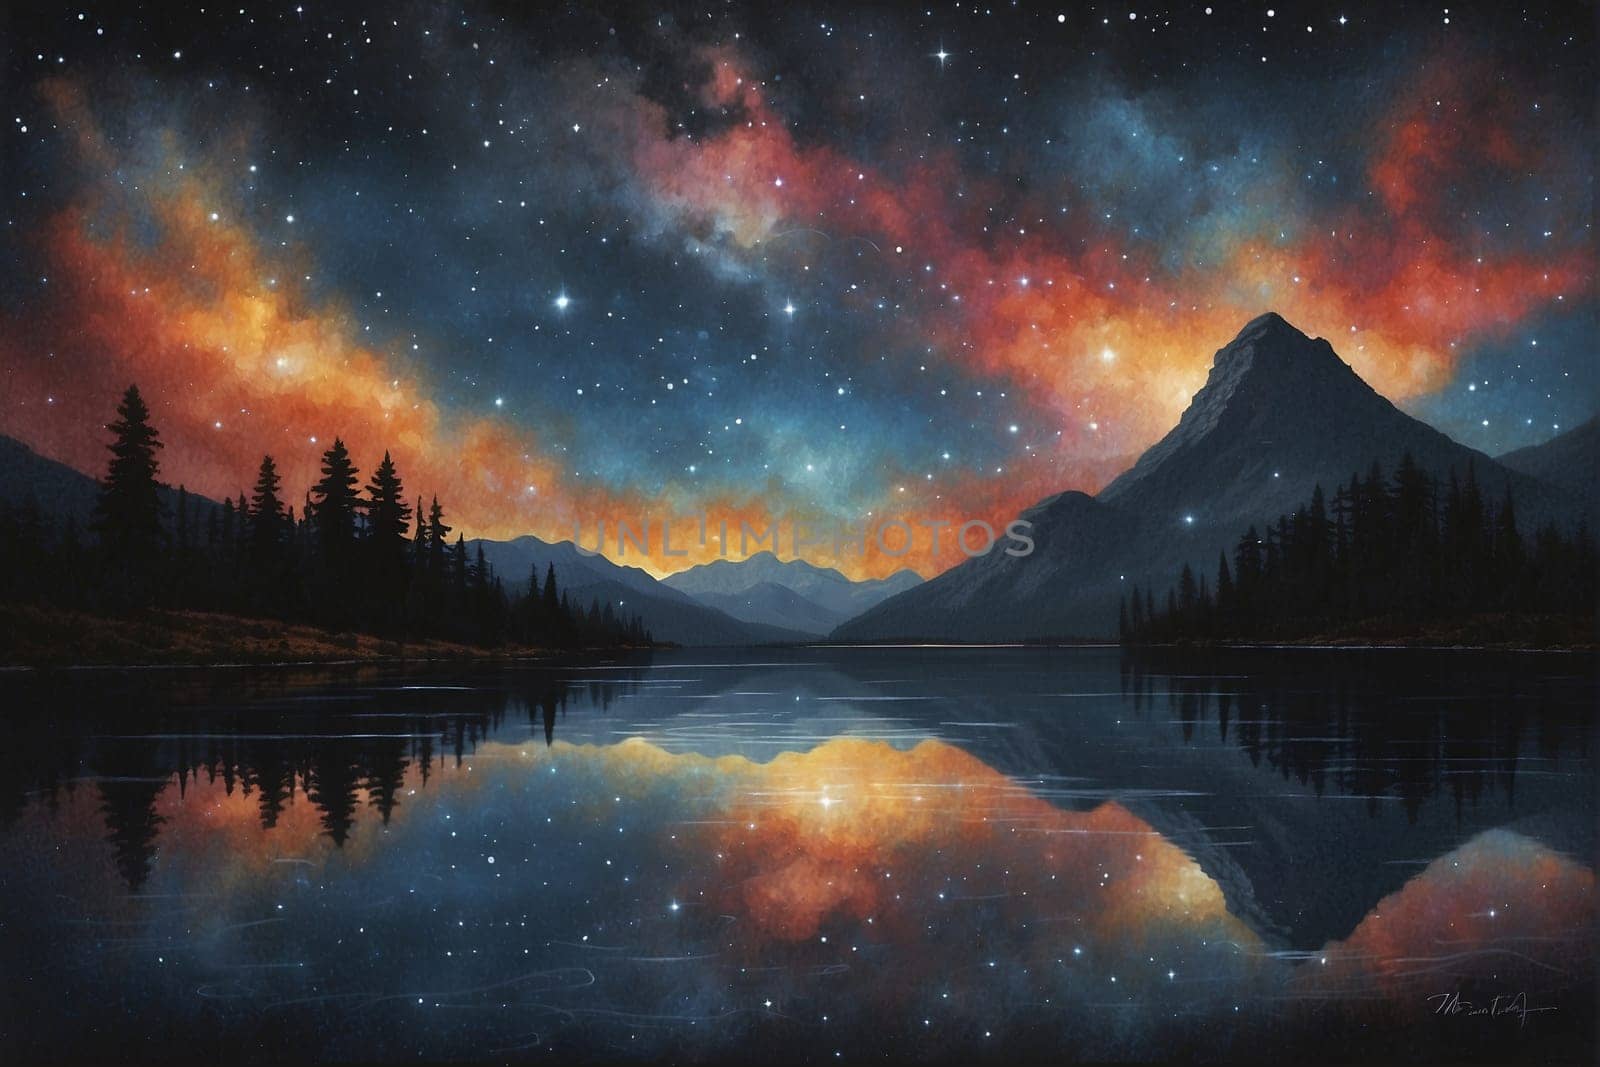 A realistic painting depicting a mountain reflected in water under a starry night sky.